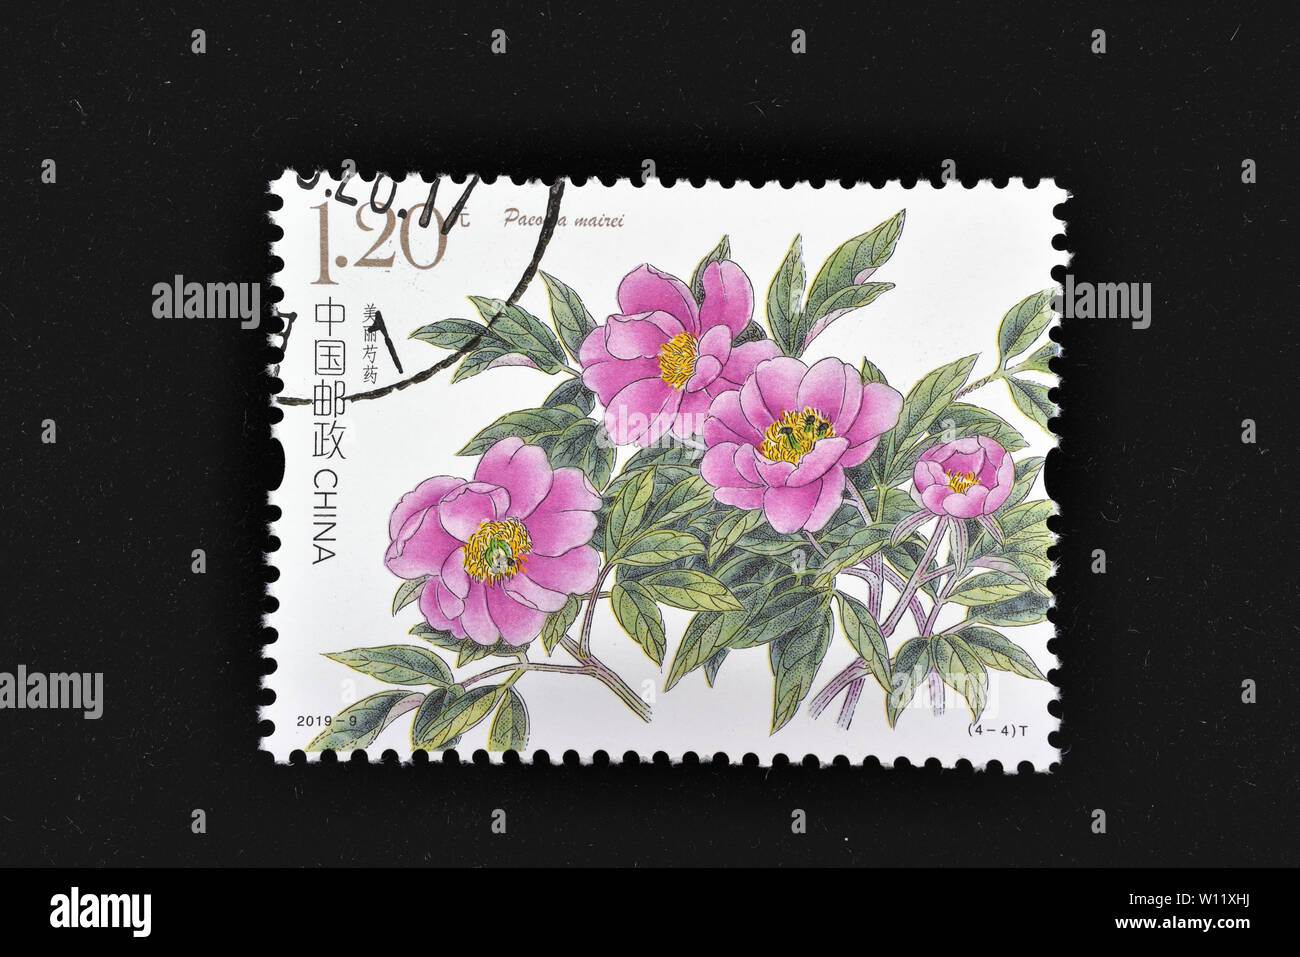 CHINA - CIRCA 2019: A stamps printed in China shows 2019-9 Chinese Herbaceous Peony  (4-3), Paeonia Obovata, 120 fen, 40 * 30 mm, circa 2019 Stock Photo